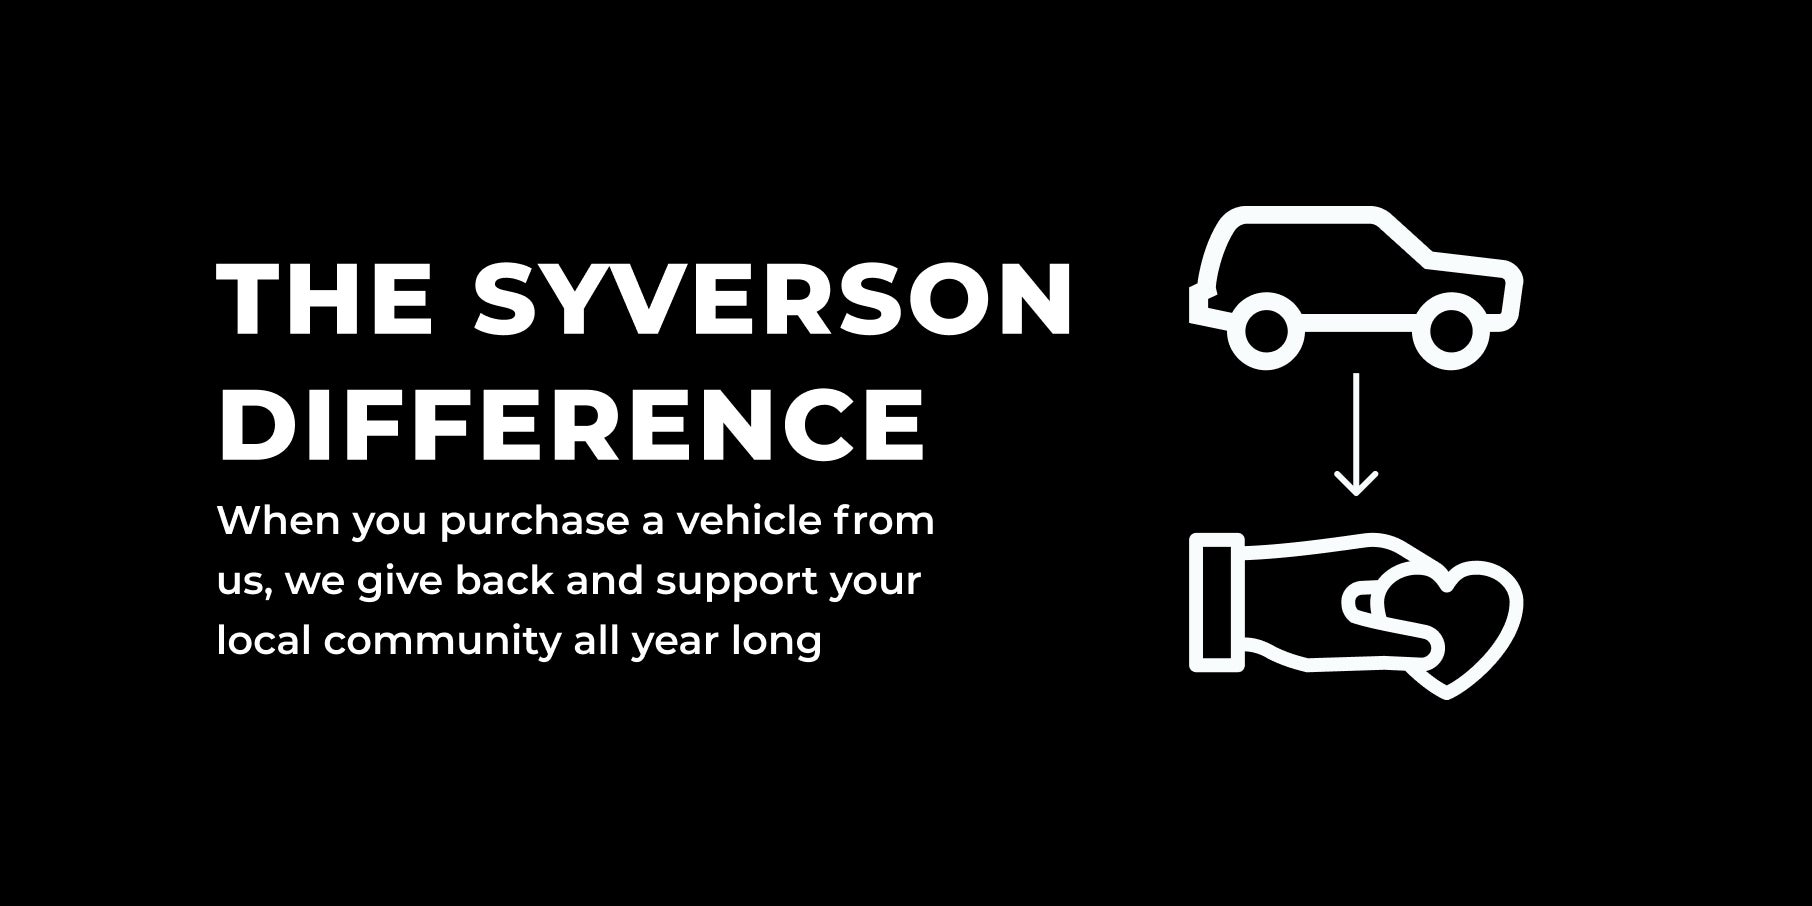 The Syverson Difference